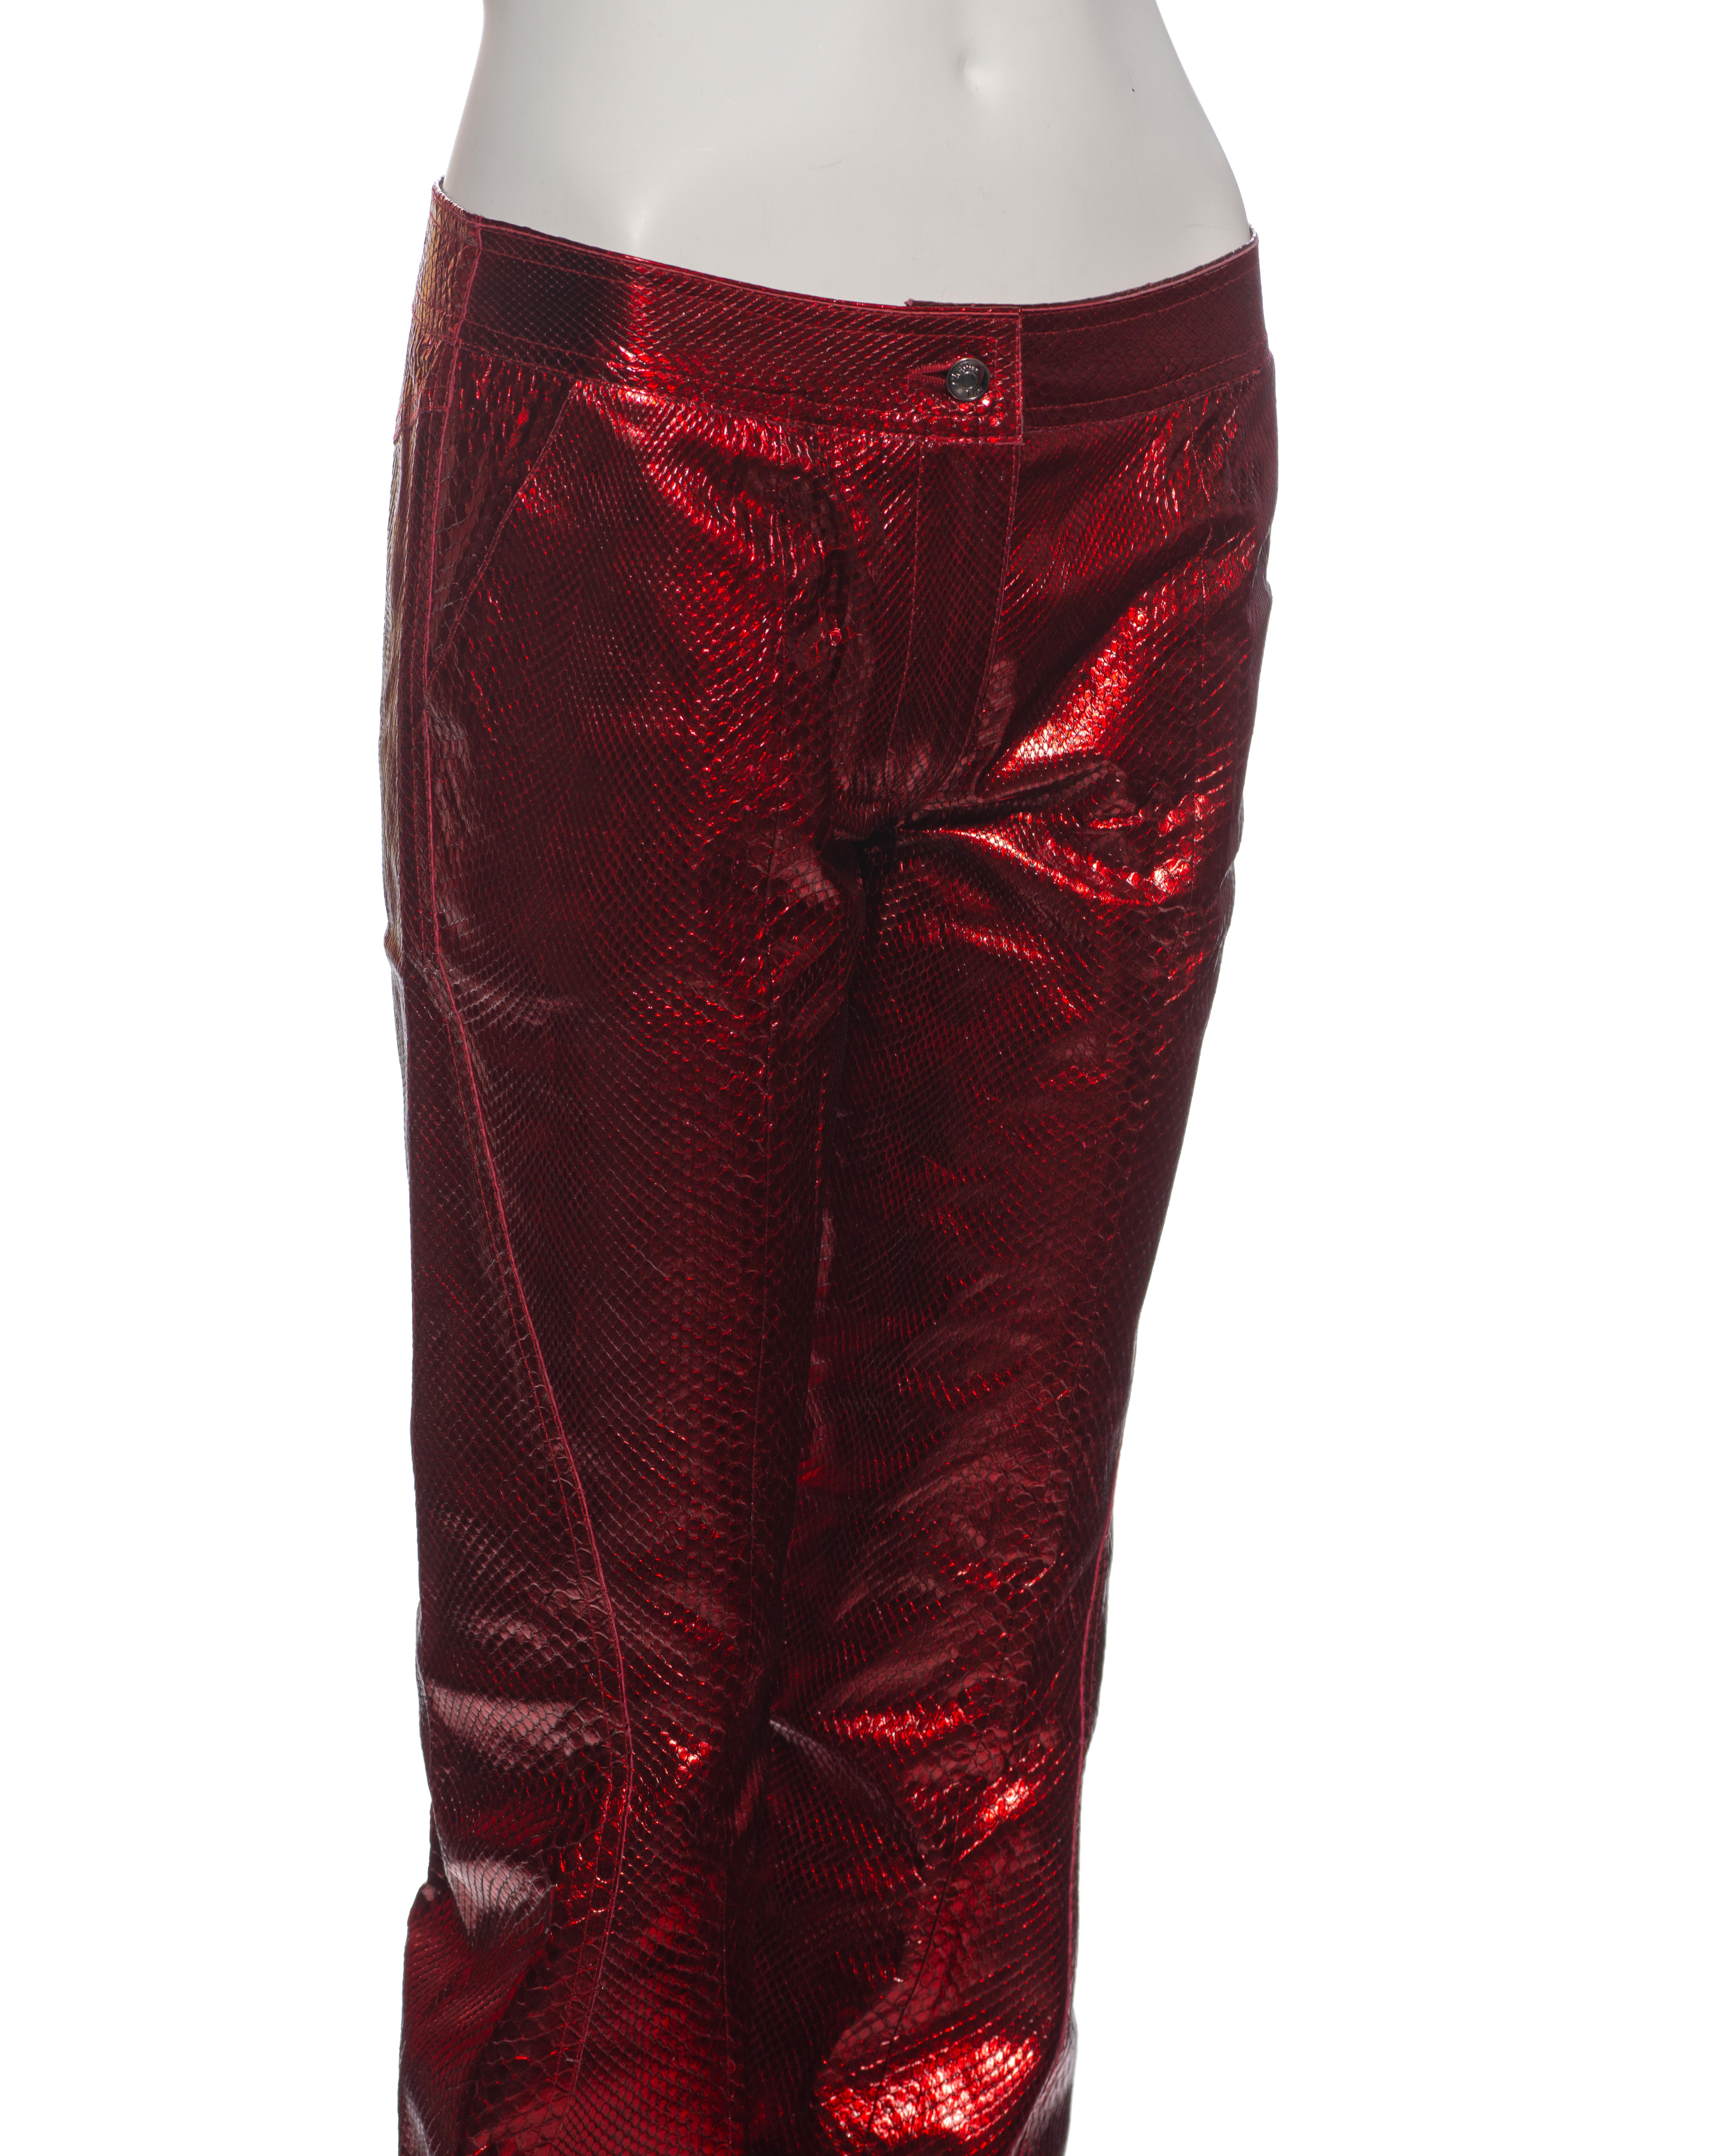 Christian Dior by John Galliano Metallic Red Python Flared Trousers, ss 2002 For Sale 1